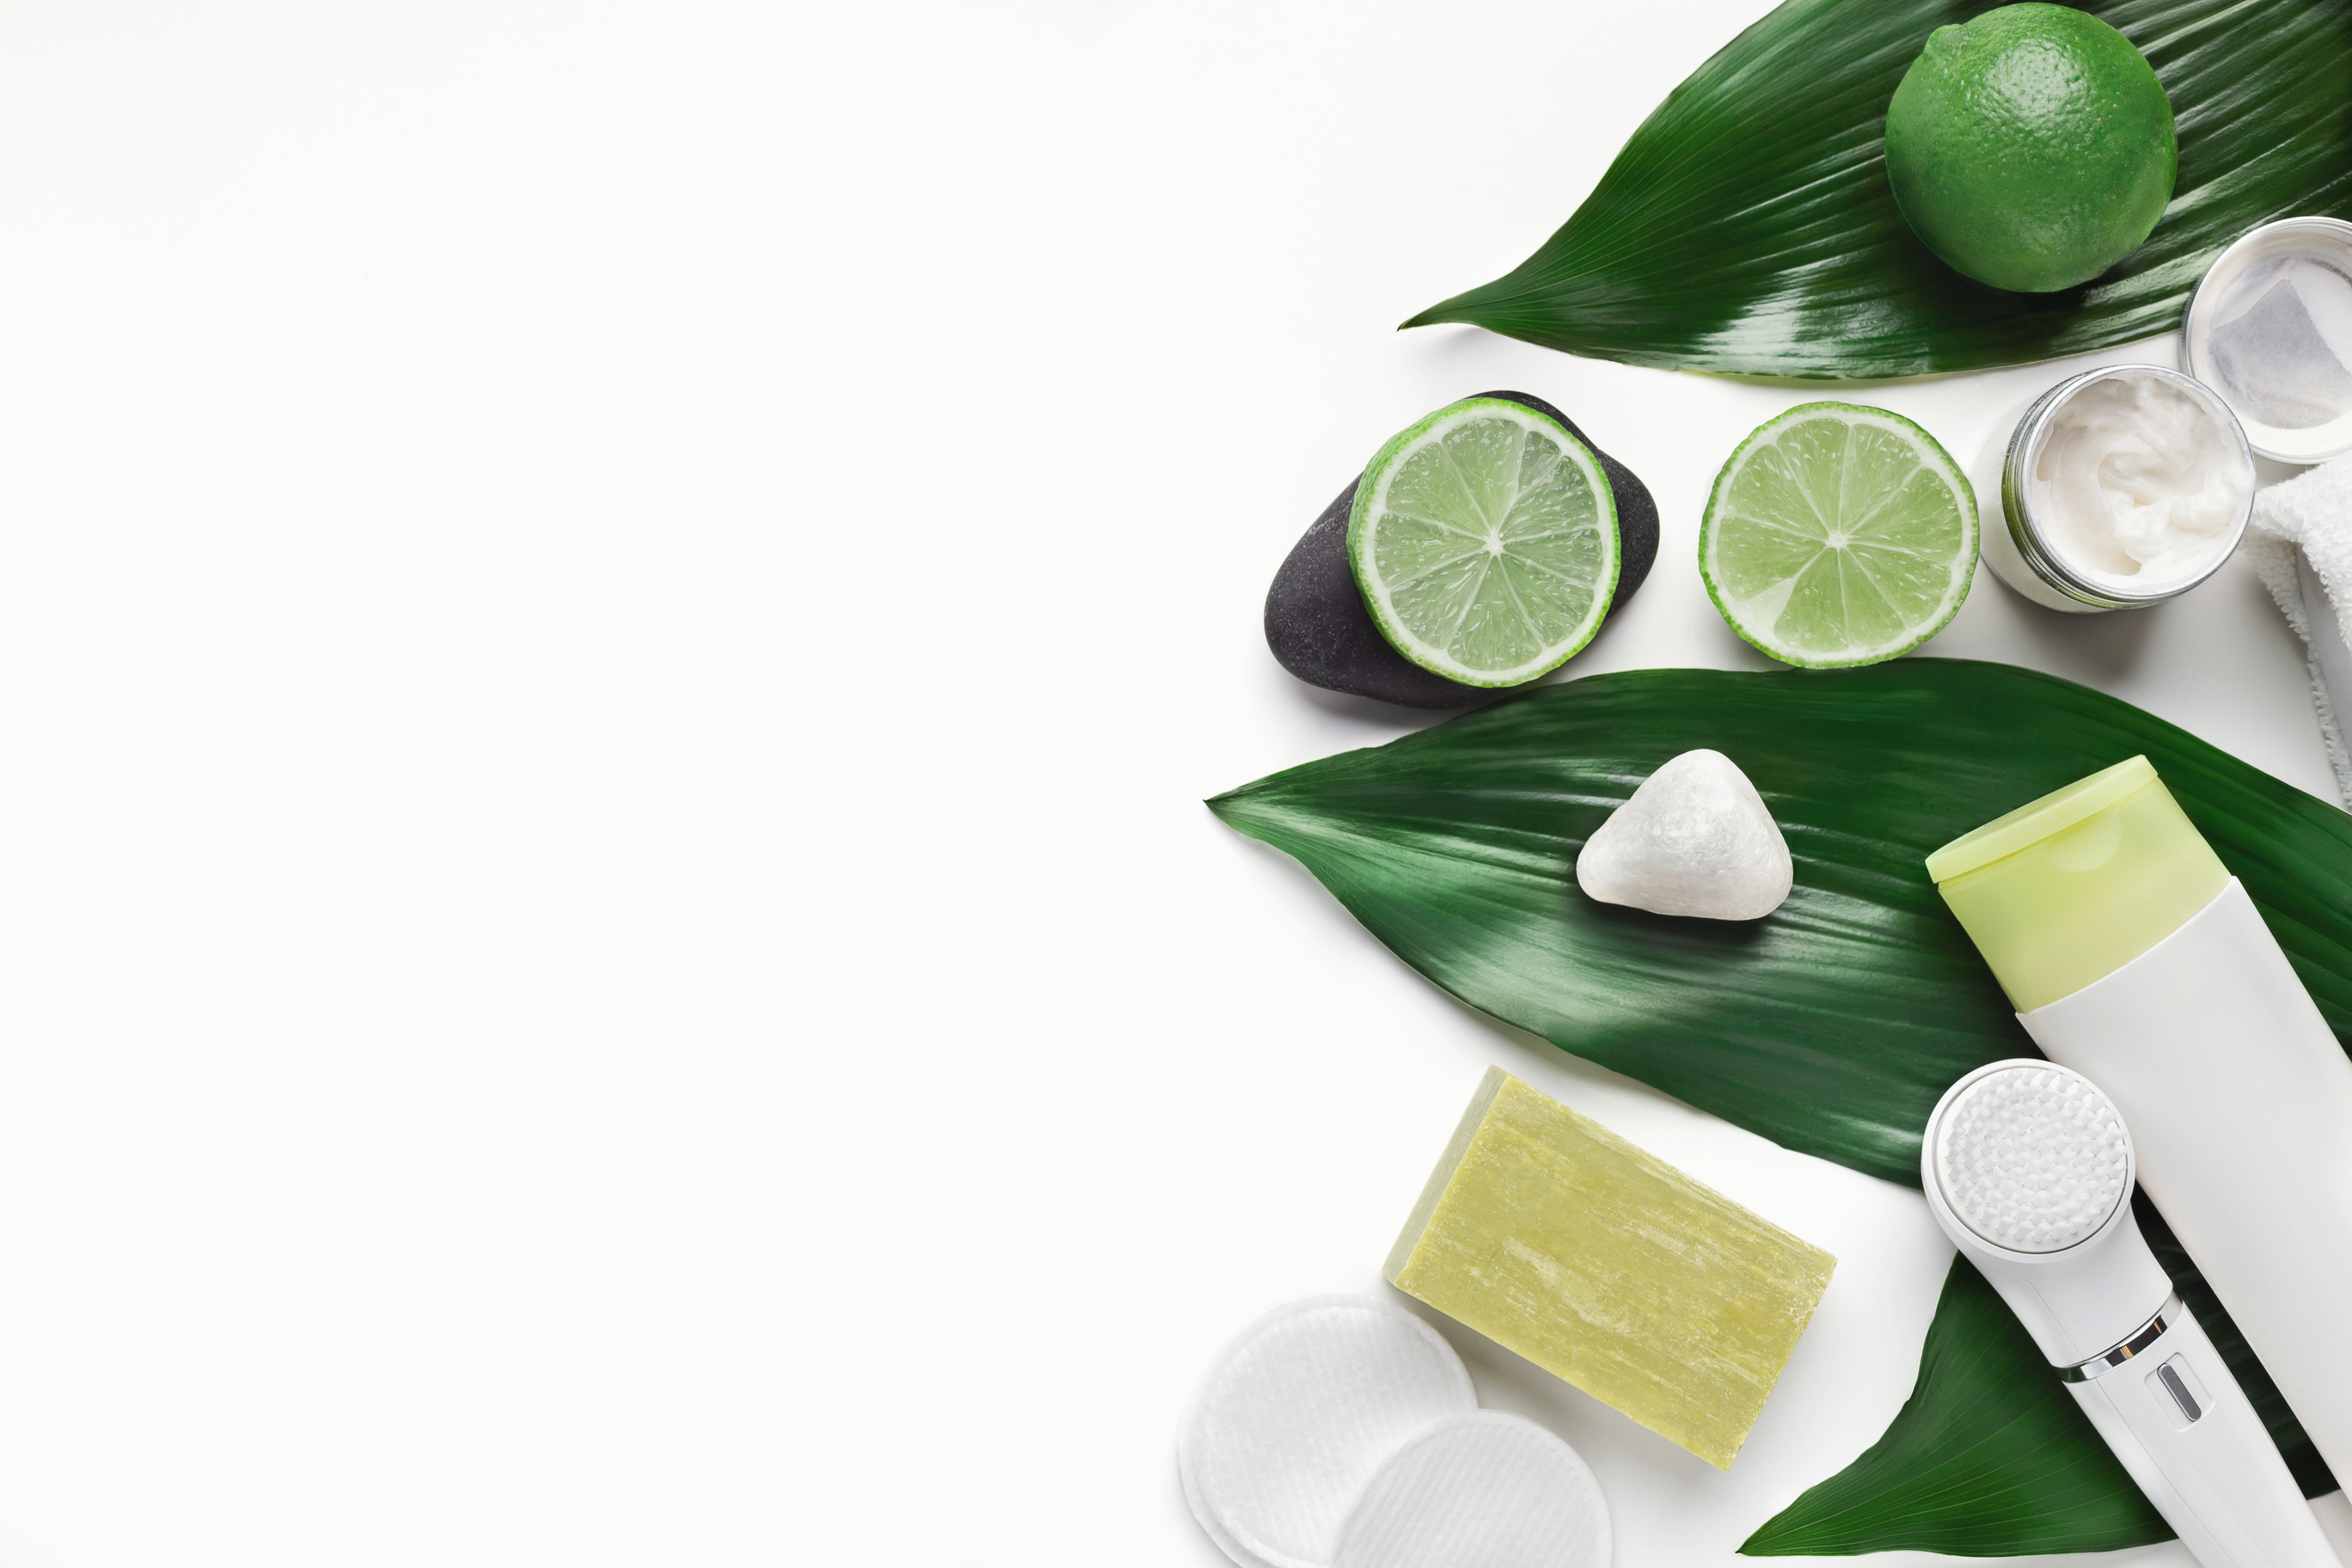 Natural skincare products on big green leaves